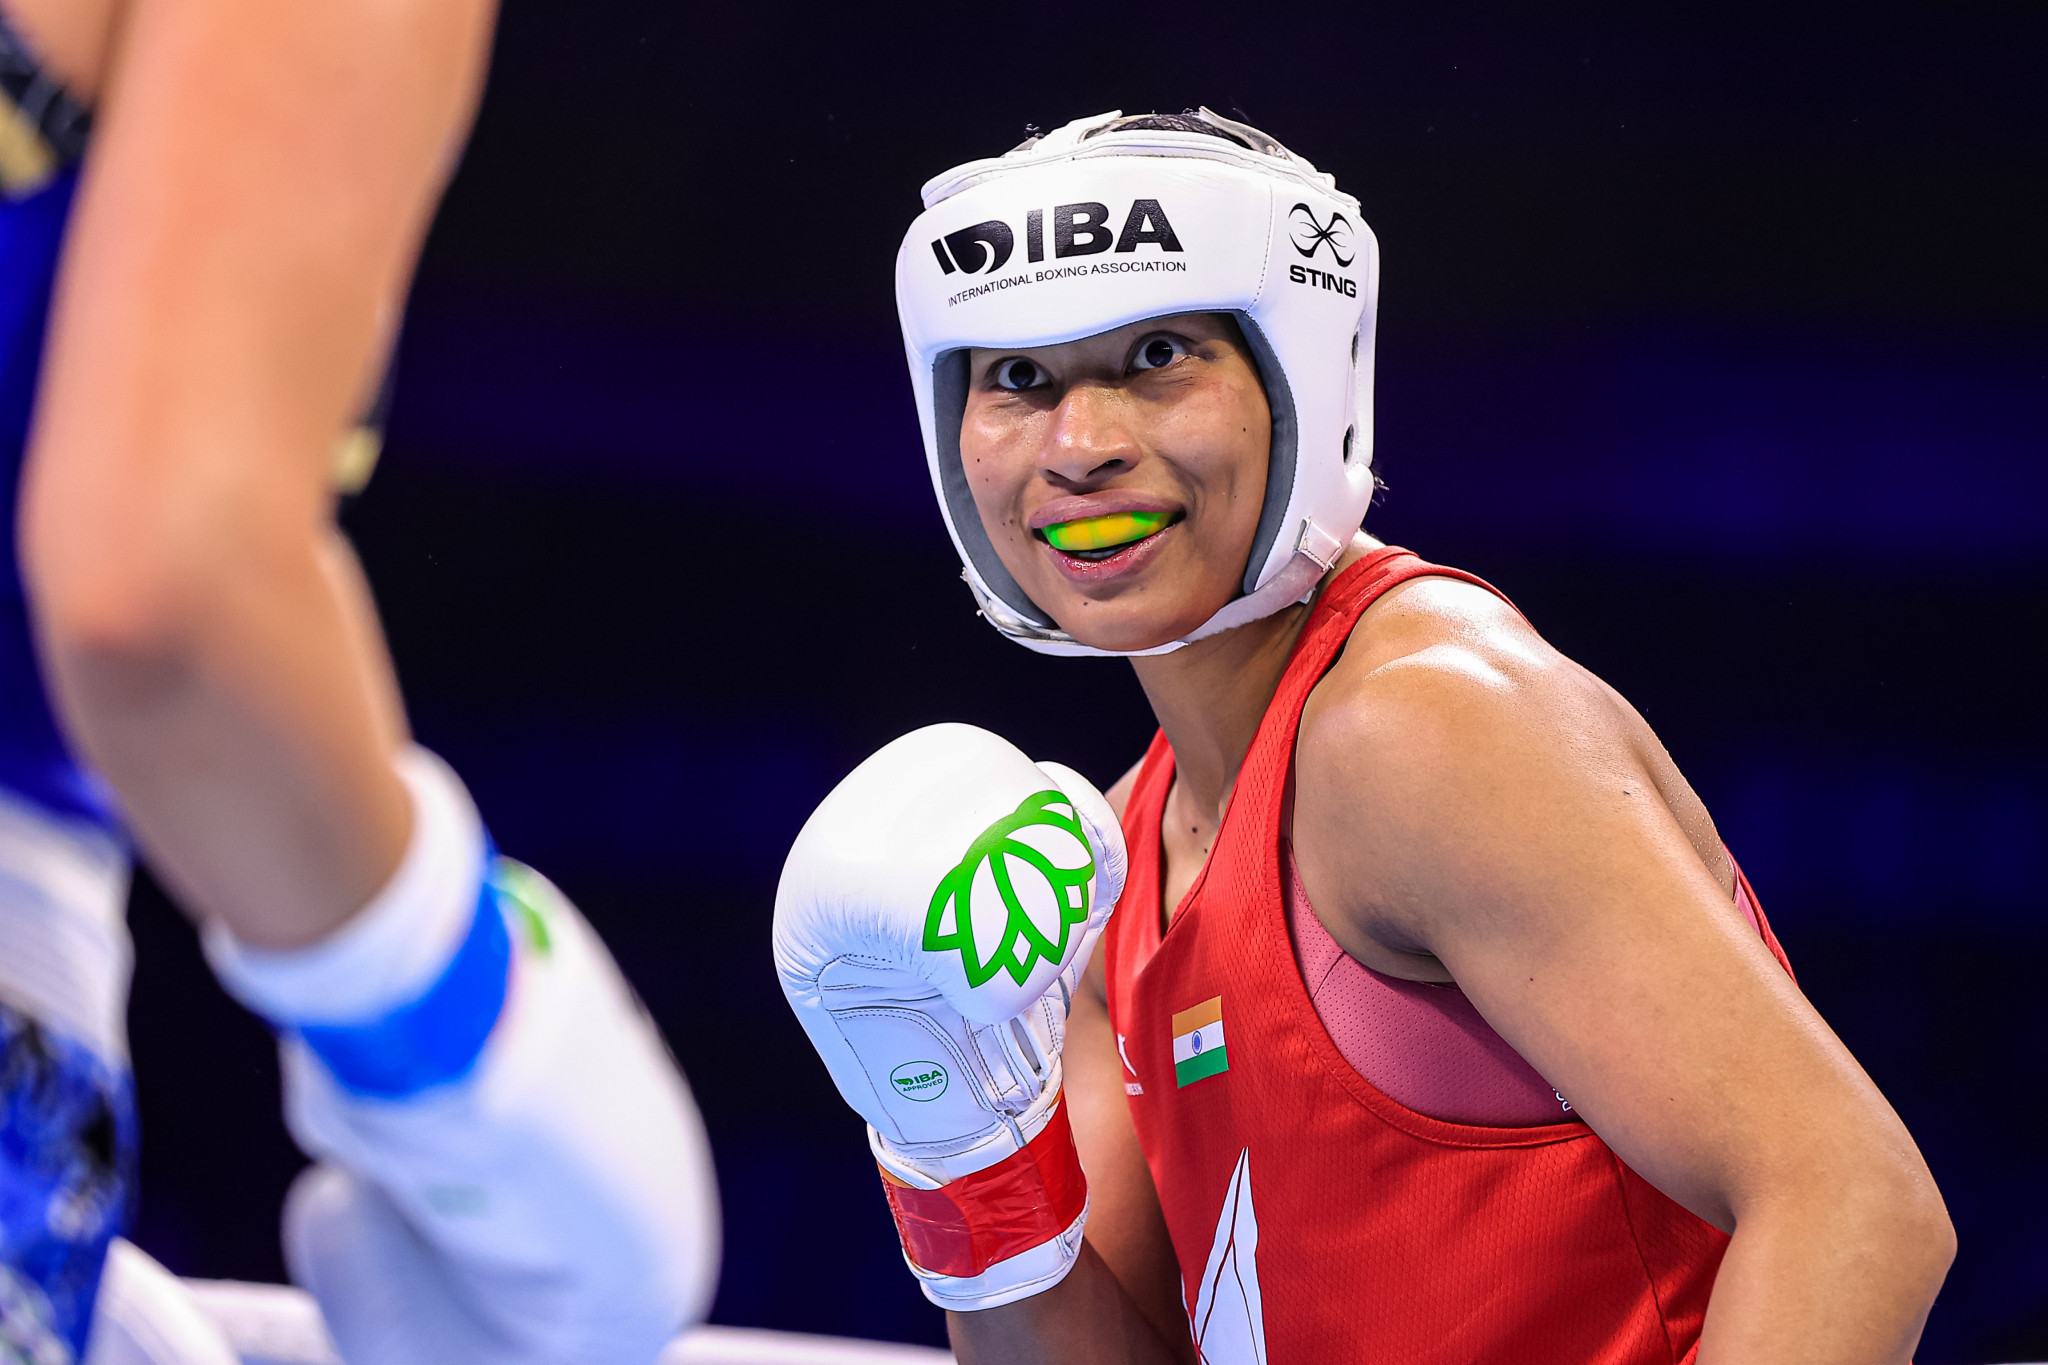 Australia's Parker won the second round and looked strong in the third only for Borgohain to be declared the winner following a bout review ©IBA